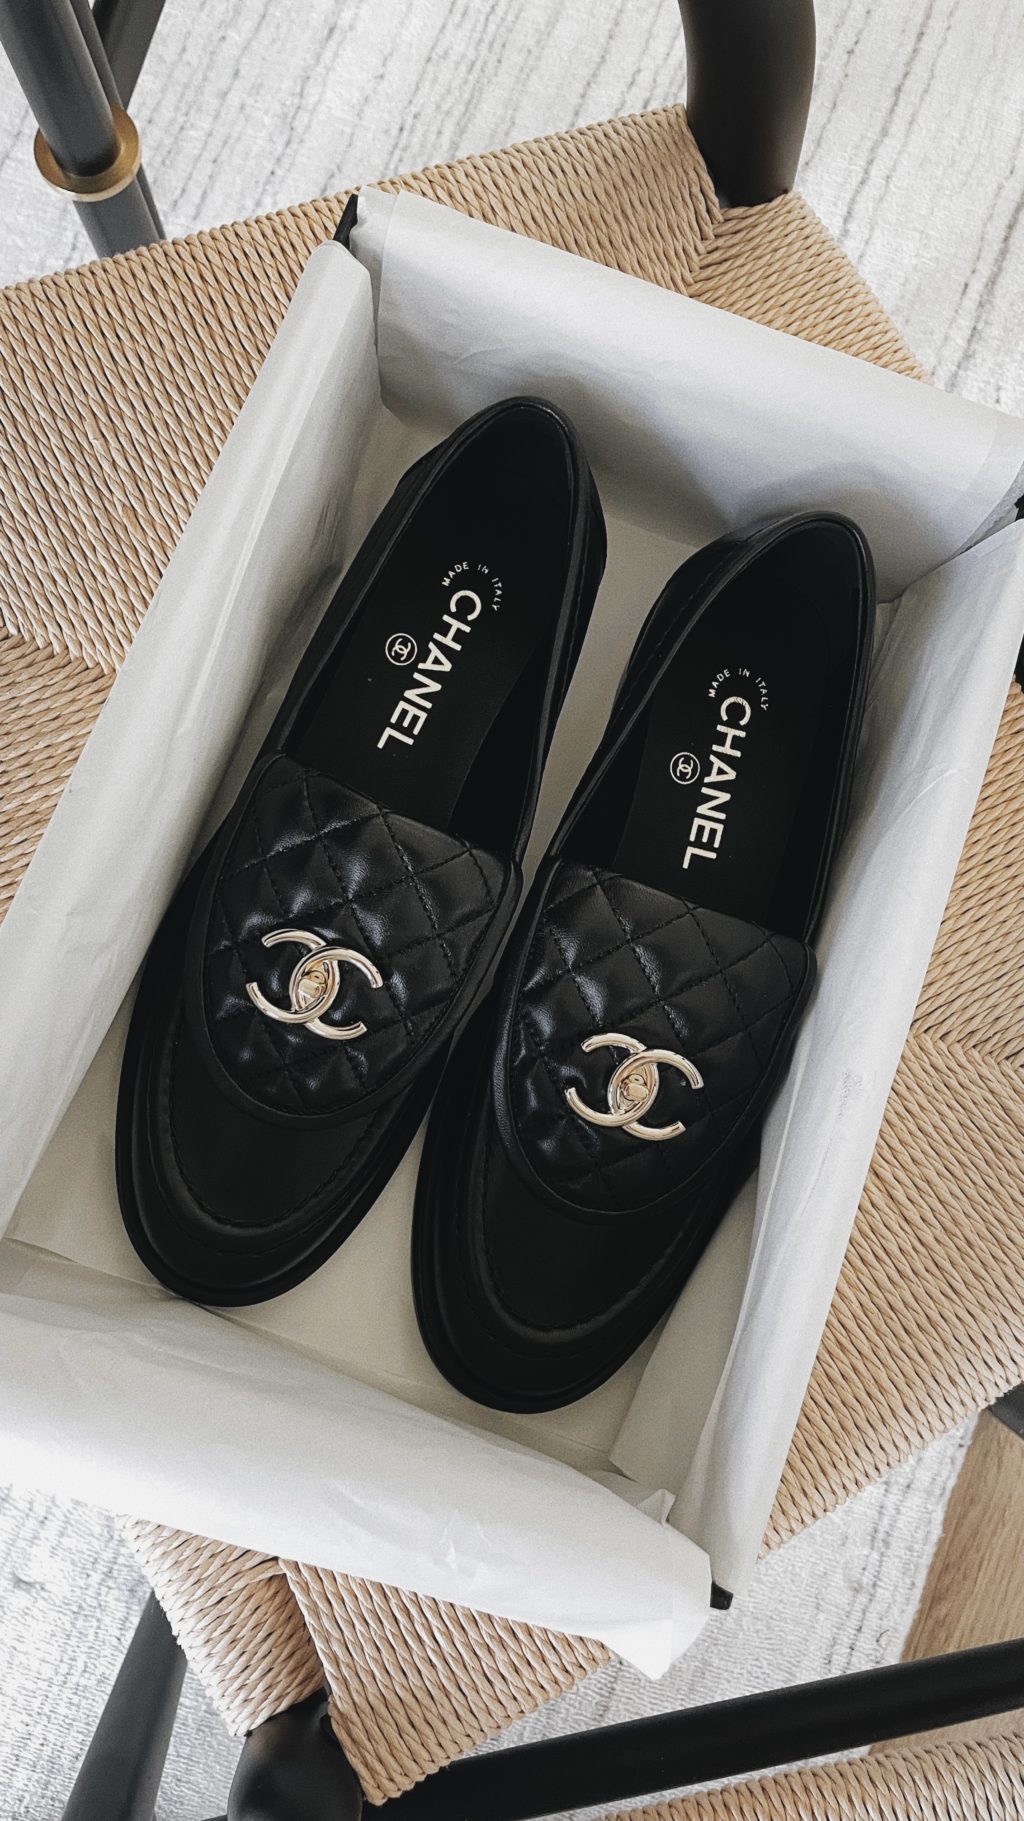 Chanel Quilted Loafer Review | The Teacher Diva: a Dallas Fashion Blog  featuring Beauty & Lifestyle